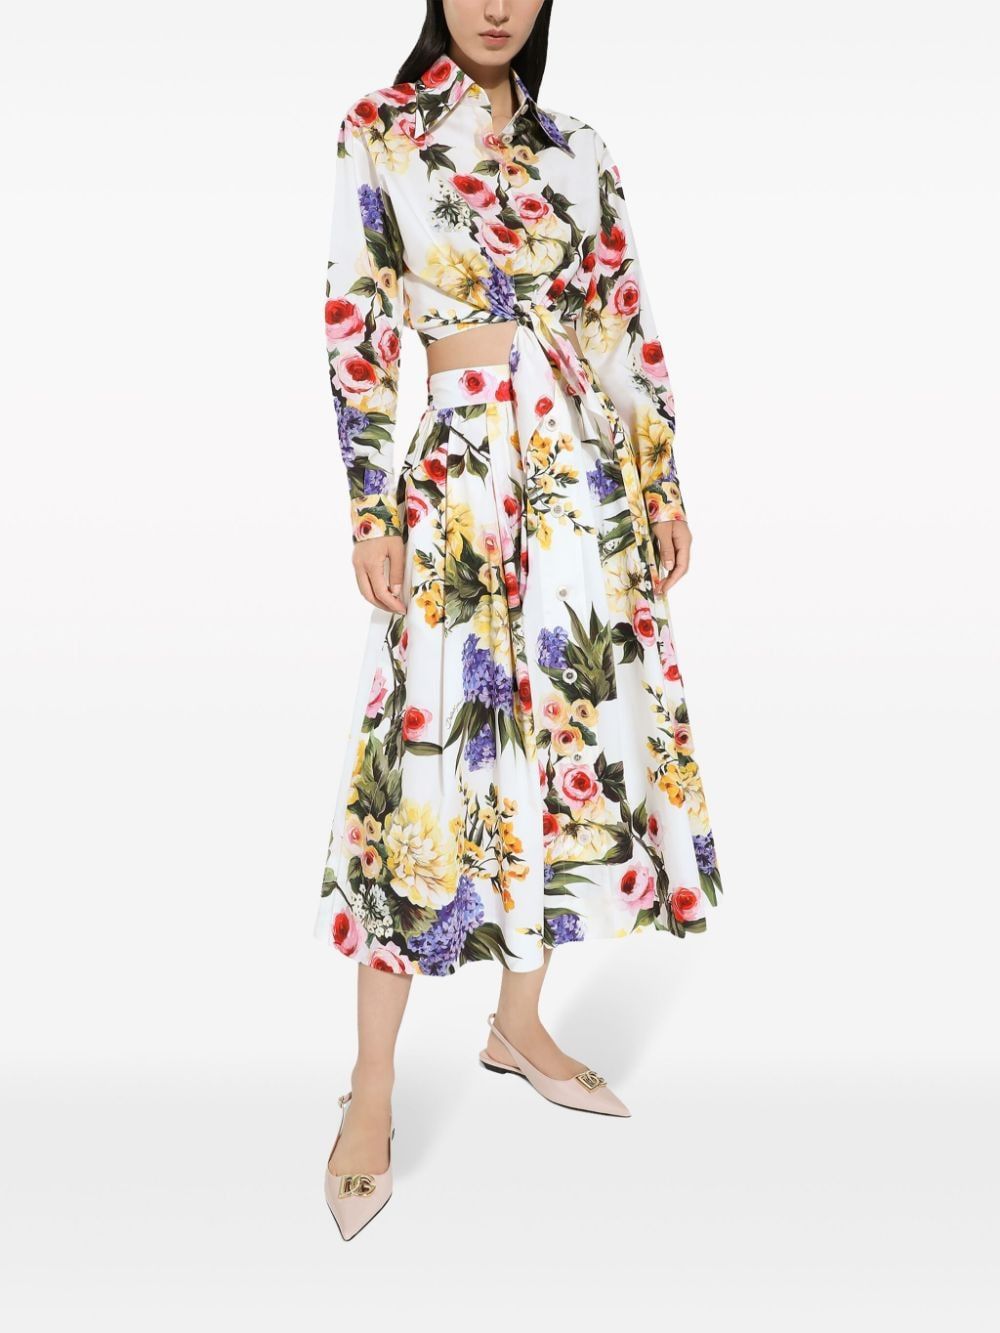 DOLCE & GABBANA Floral Print Midi Skirt for Women in White - SS24 Collection